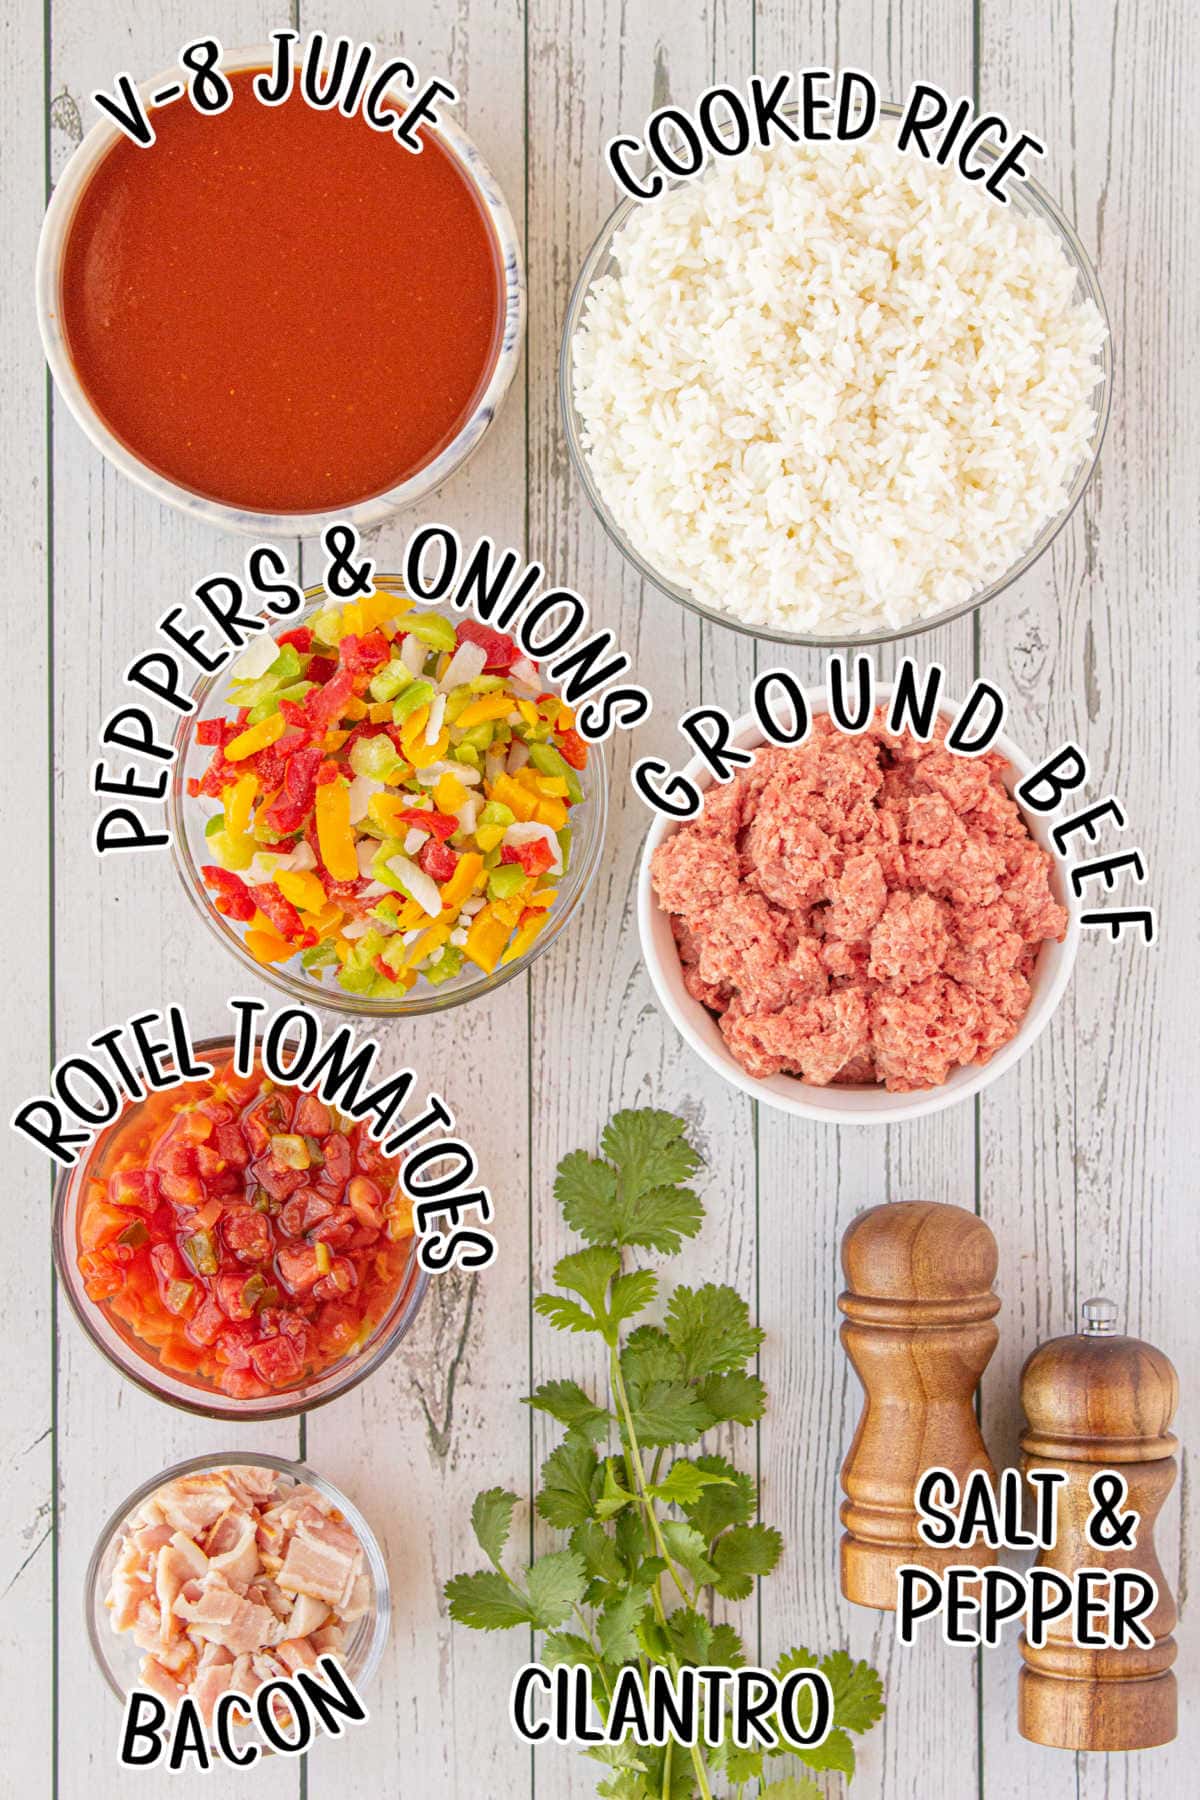 Labeled ingredients for Spanish rice.